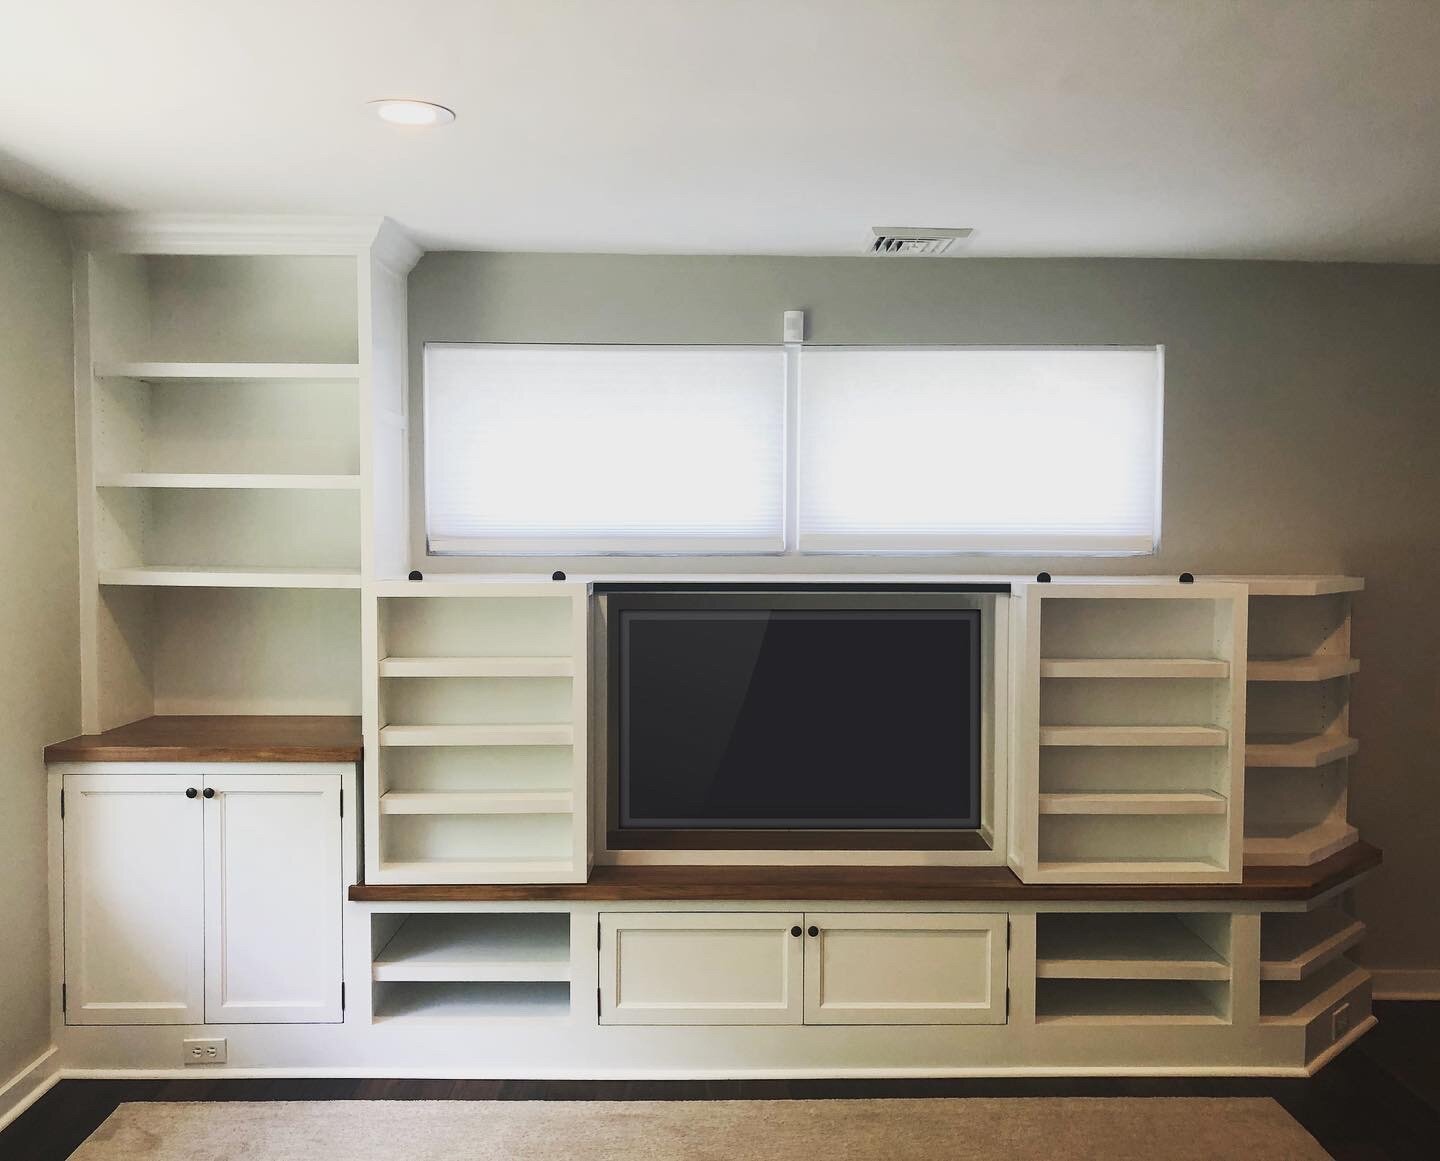  In lieu of standard barn doors I came up with an idea for shallow sliding shelf cases as you can see in the picture above. Mounted on mini-barn door tracks, the cabinets glide open to reveal the TV within. They sit just above the countertop and have